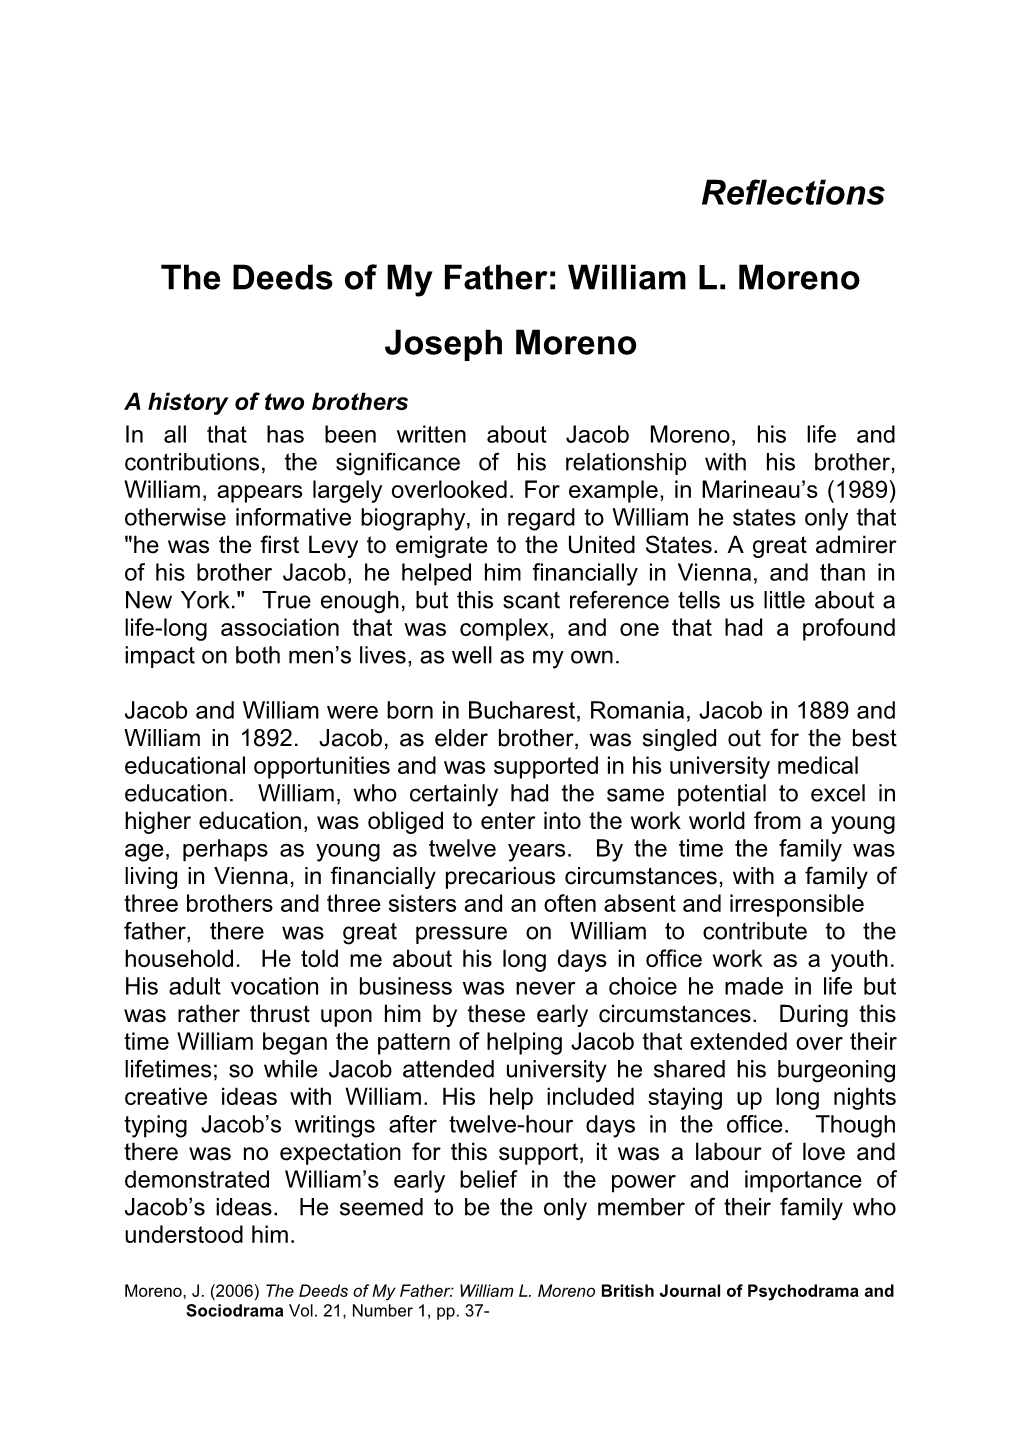 The Deeds of My Father:William L